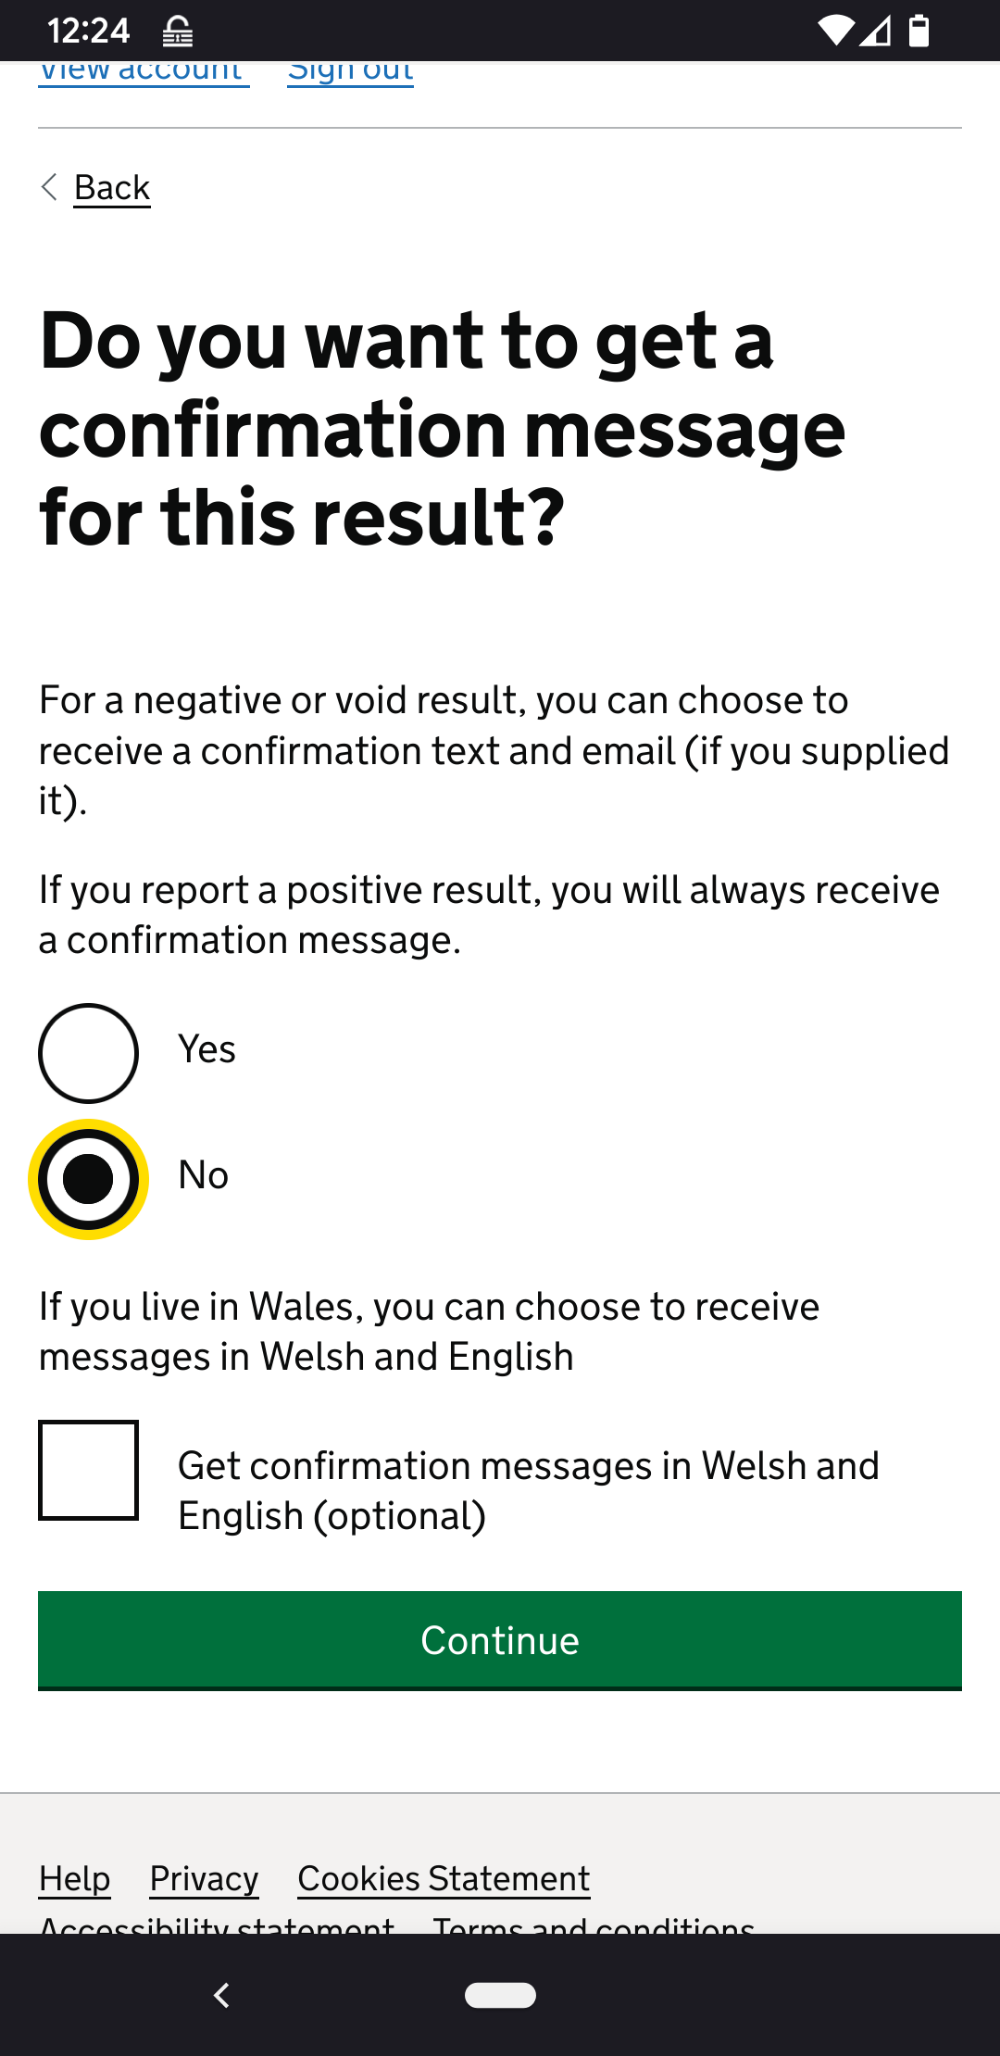 A screenshot of the Test for Coronavirus service on Gov.UK which gives the user the option of receiving email and SMS notifications of a test being taken